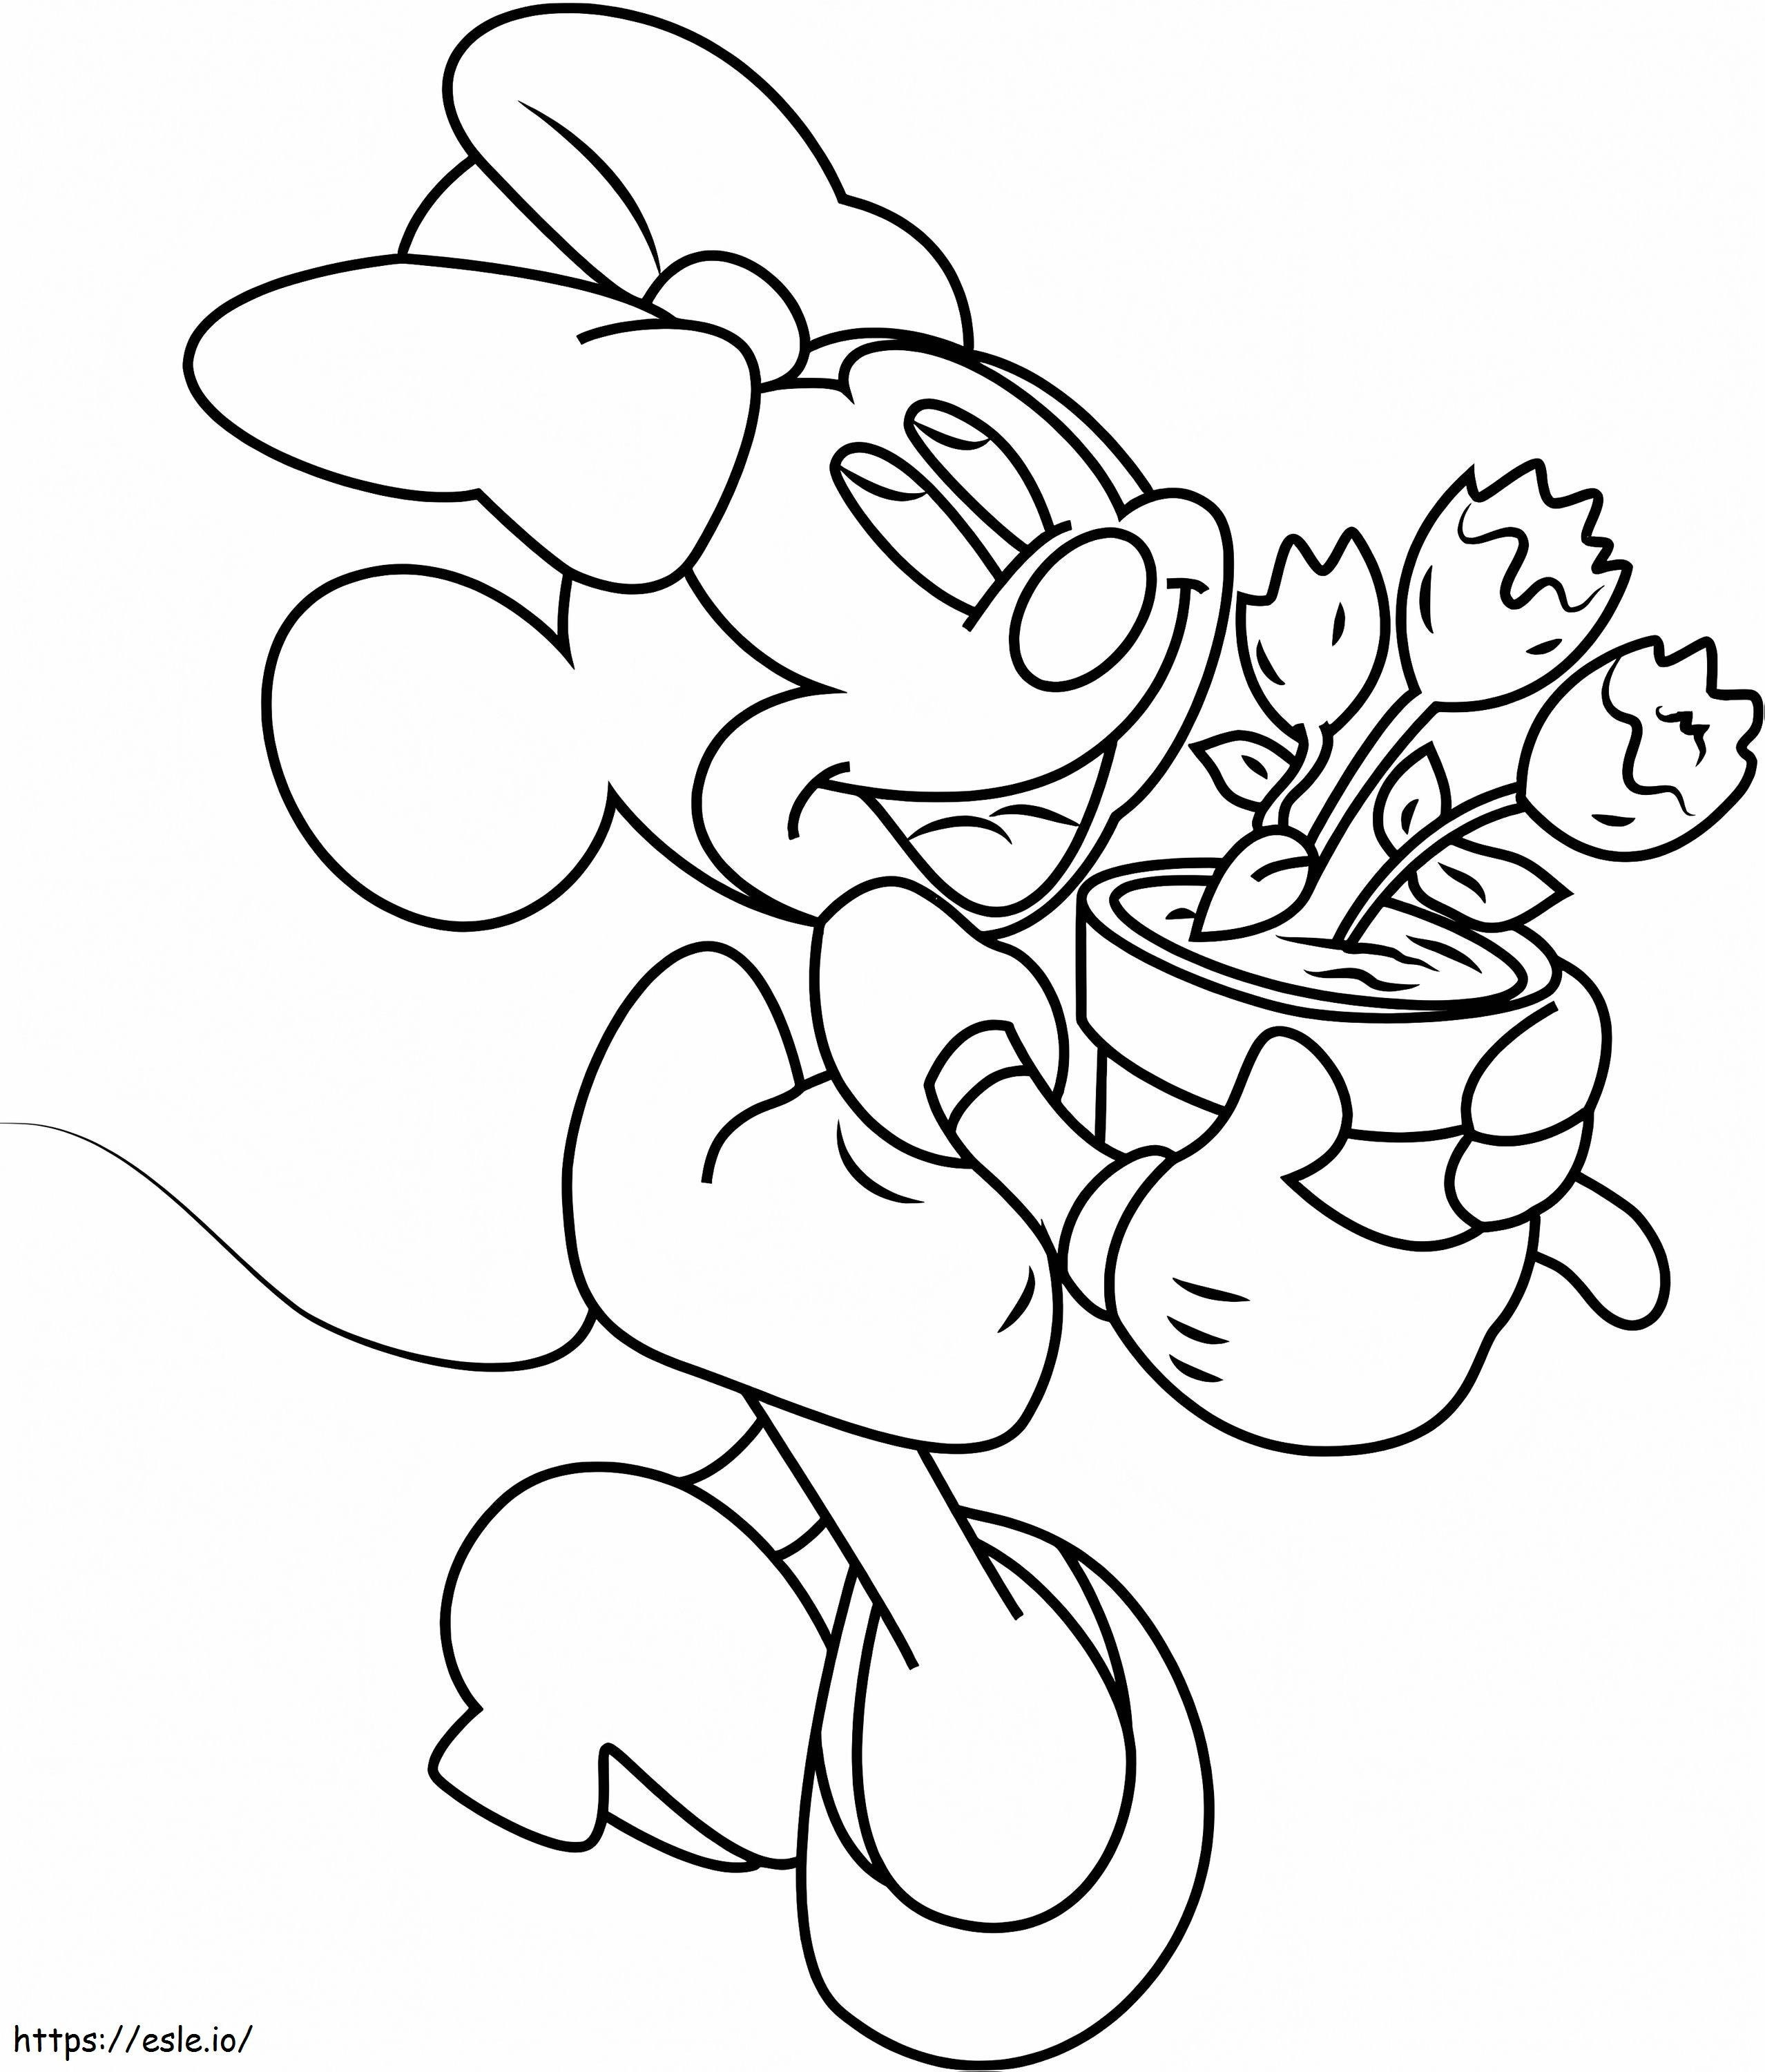 Minnie Mouse With Flower Pot coloring page